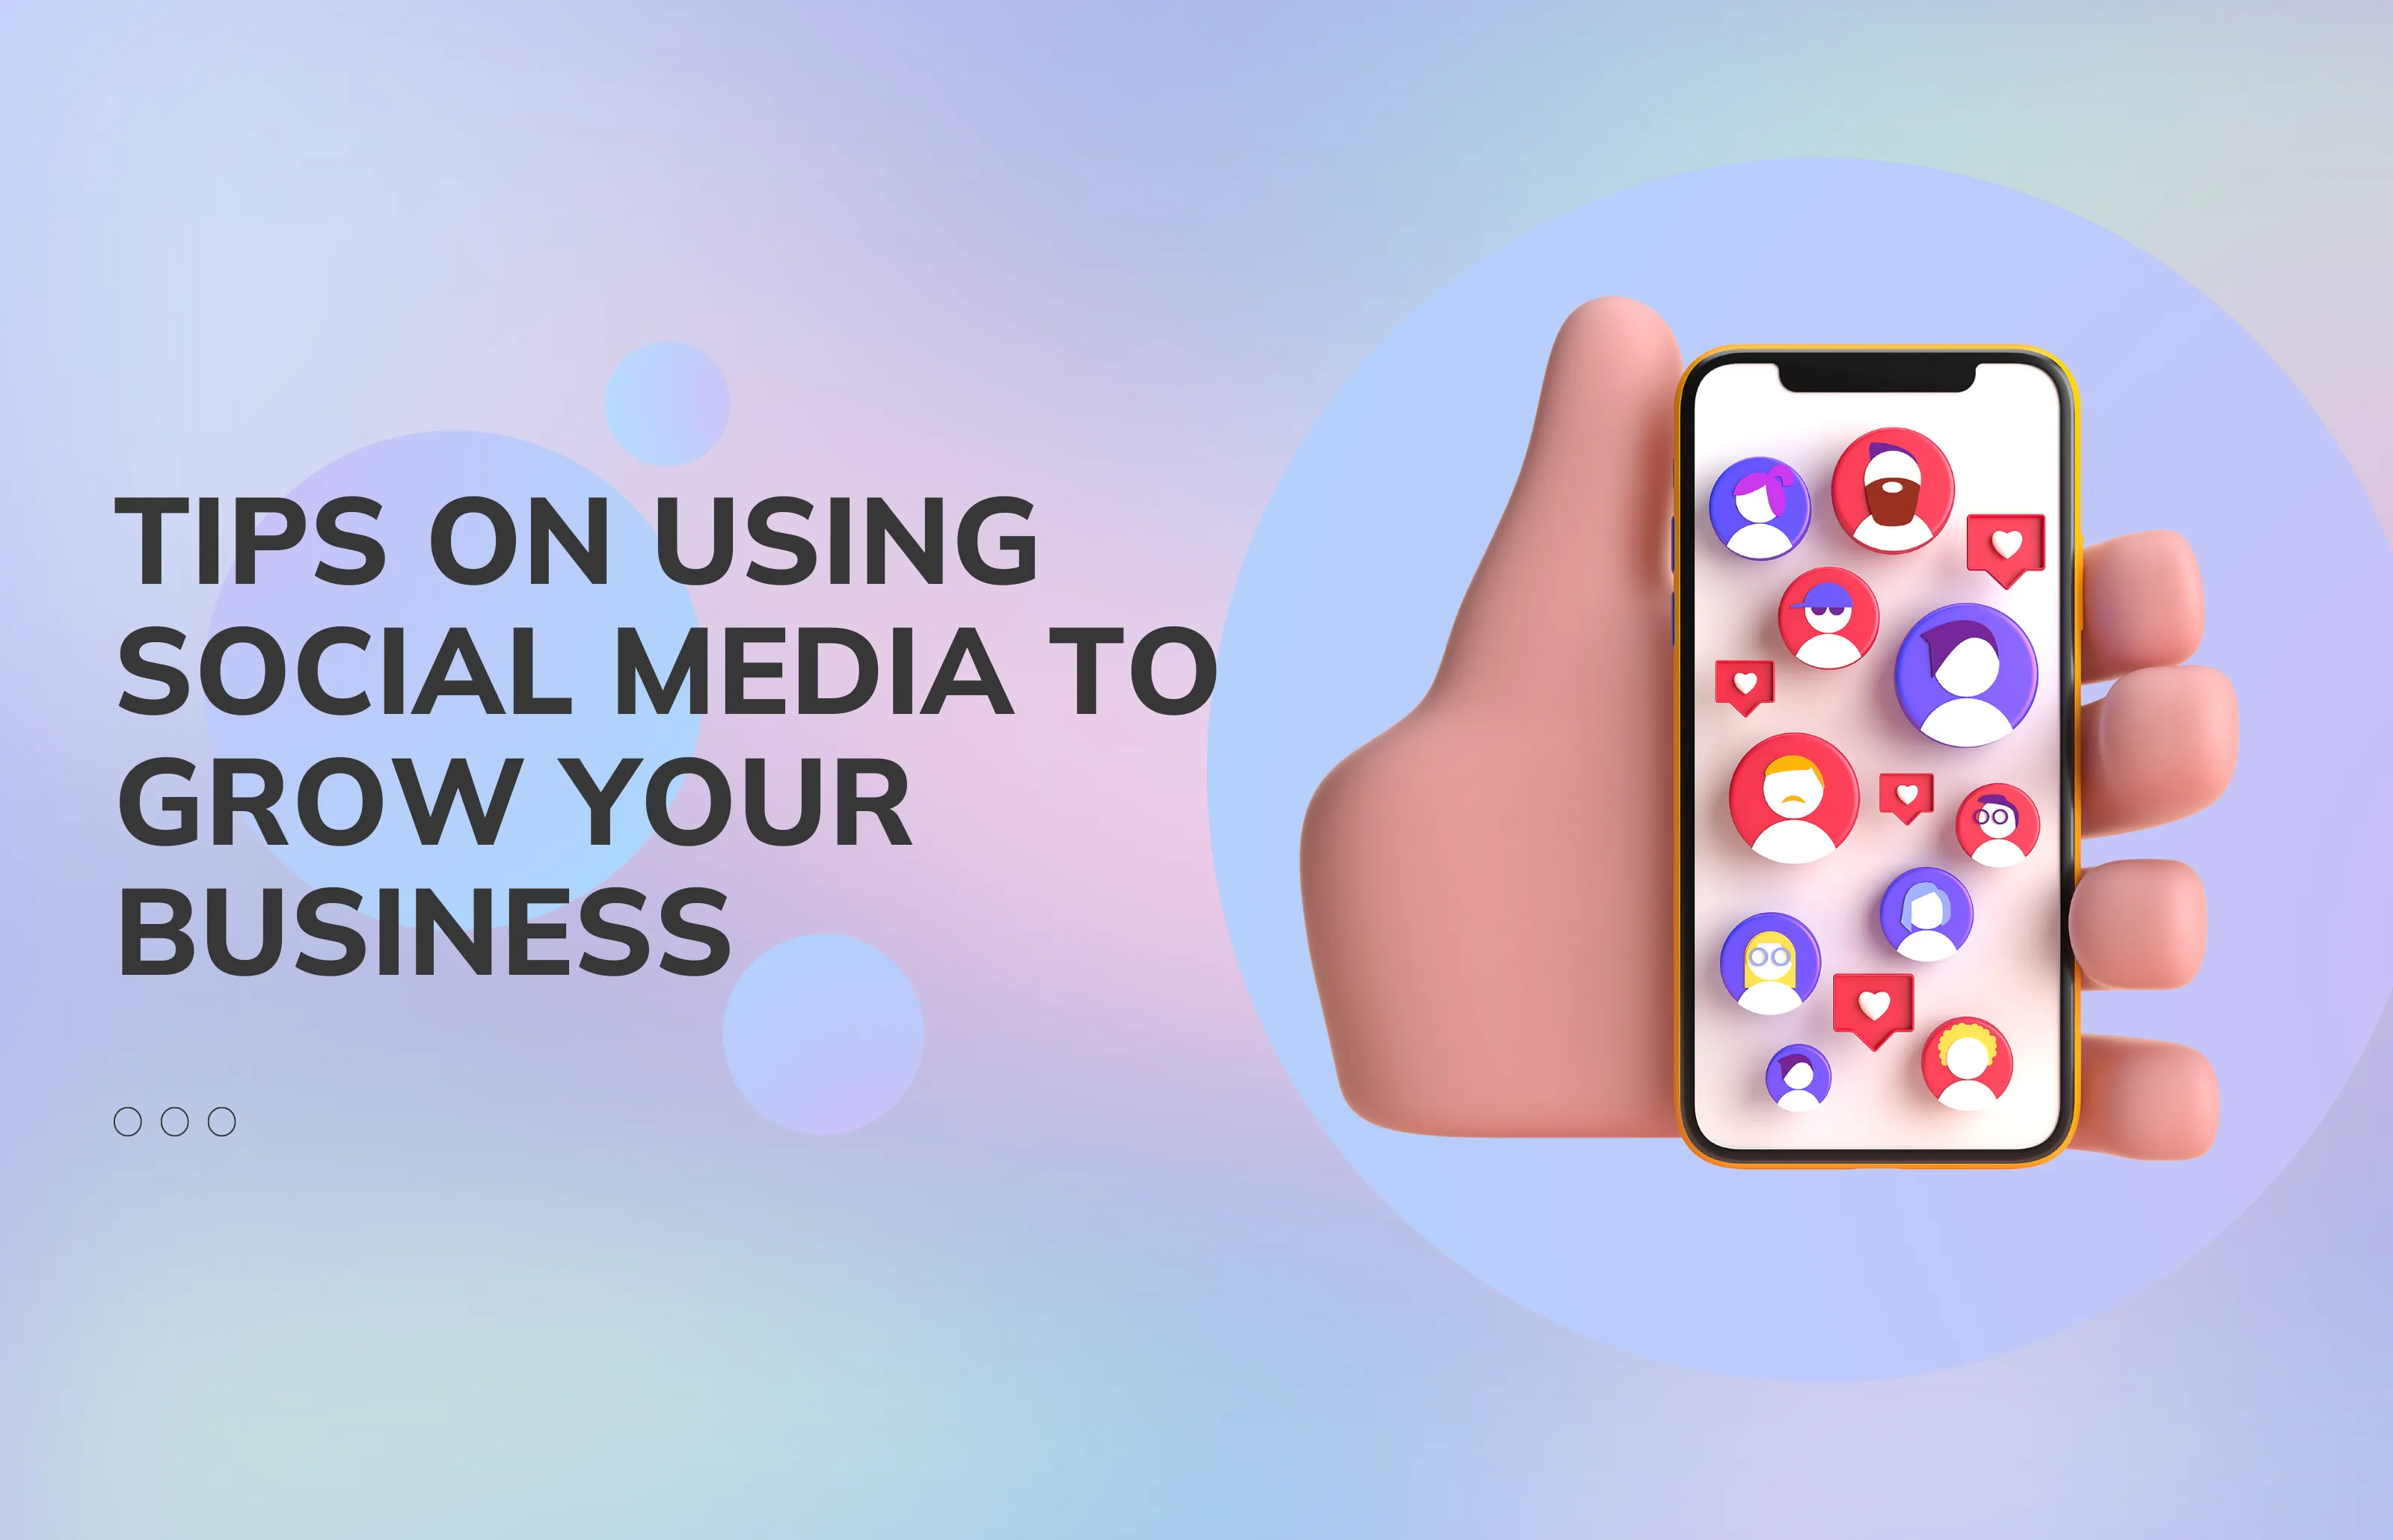 Tips on Using Social Media to Grow Your Business